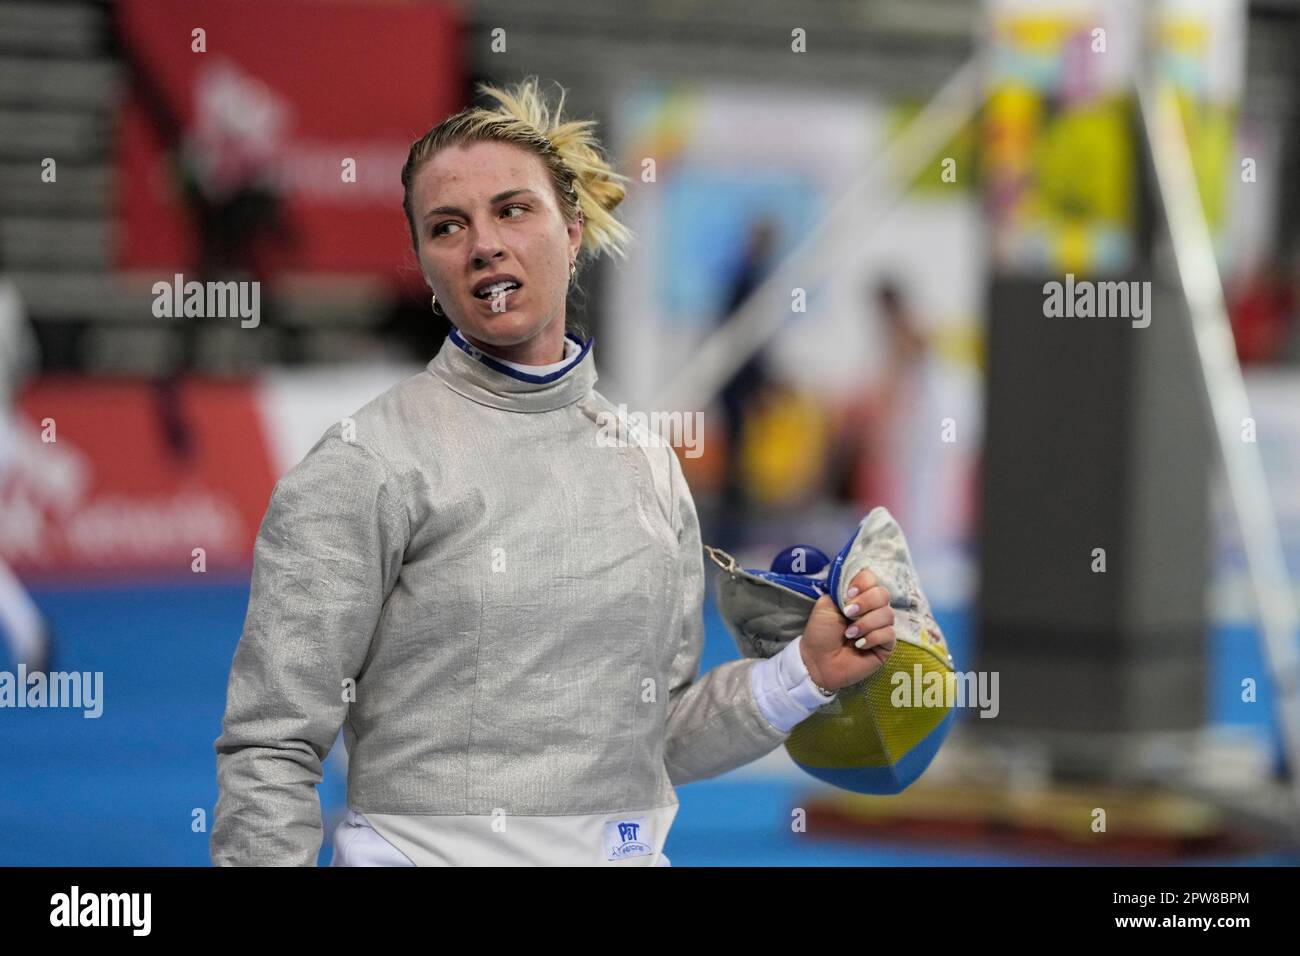 Olga Kharlan of Ukraine reacts after defeating Cyrielle Rioux of France during the womens FIE fencing sabre grand prix competition in Seoul, South Korea, Saturday, April 29, 2023